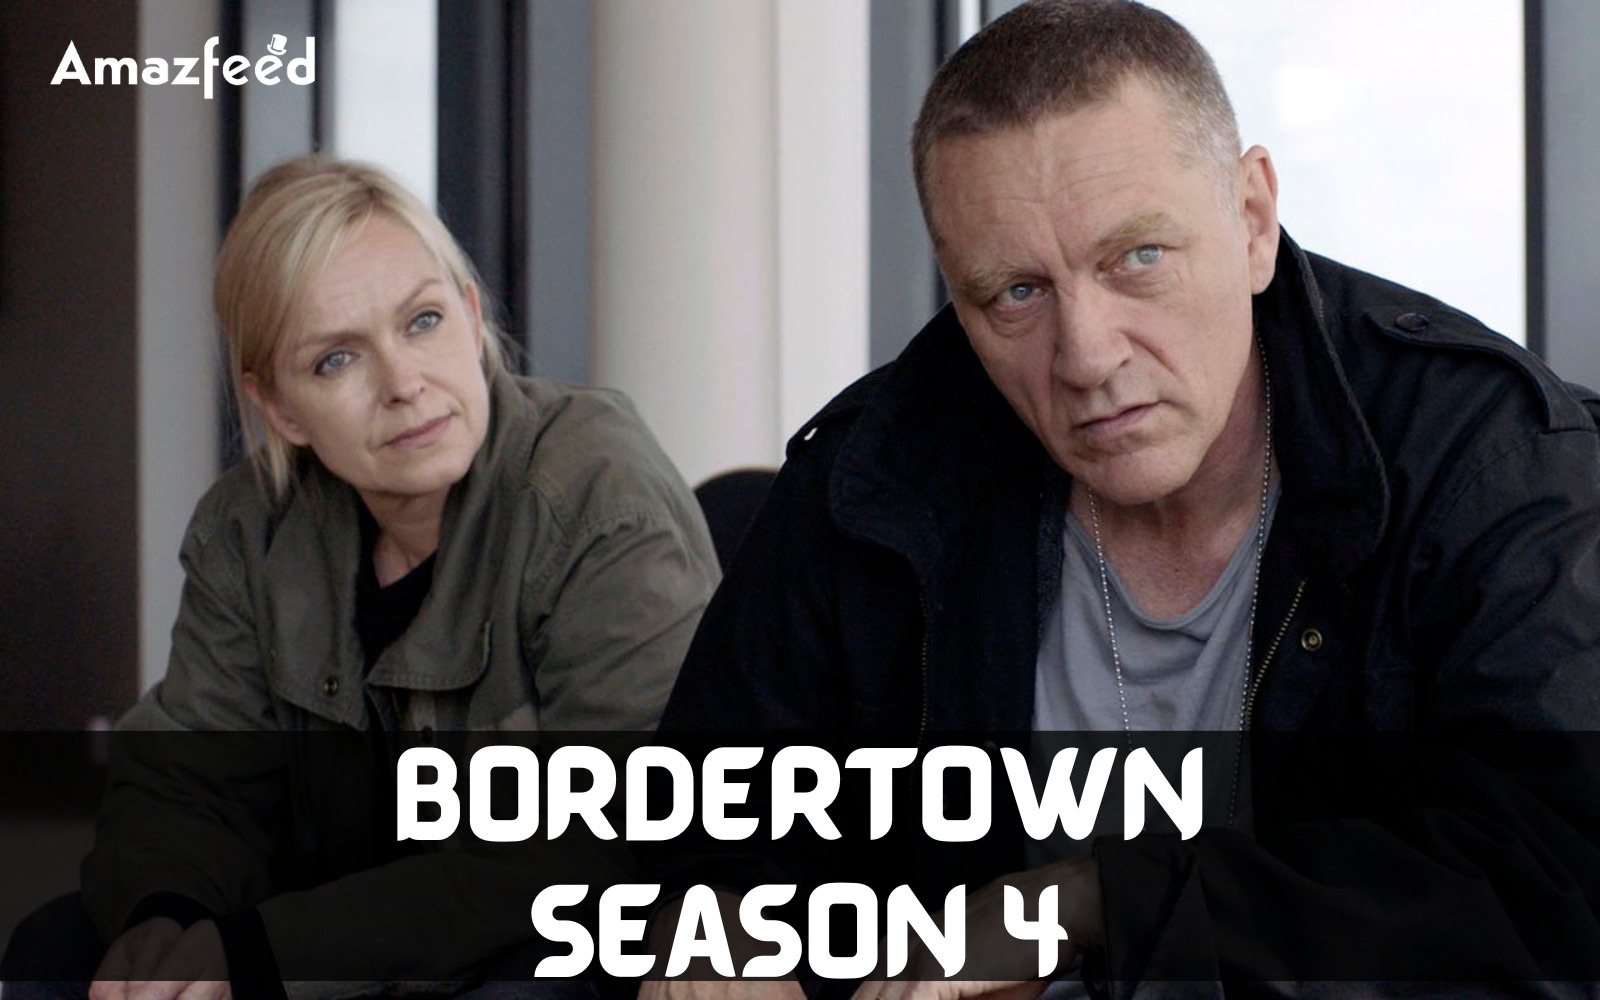 Will there be any Updates on Bordertown Season 4 Trailer